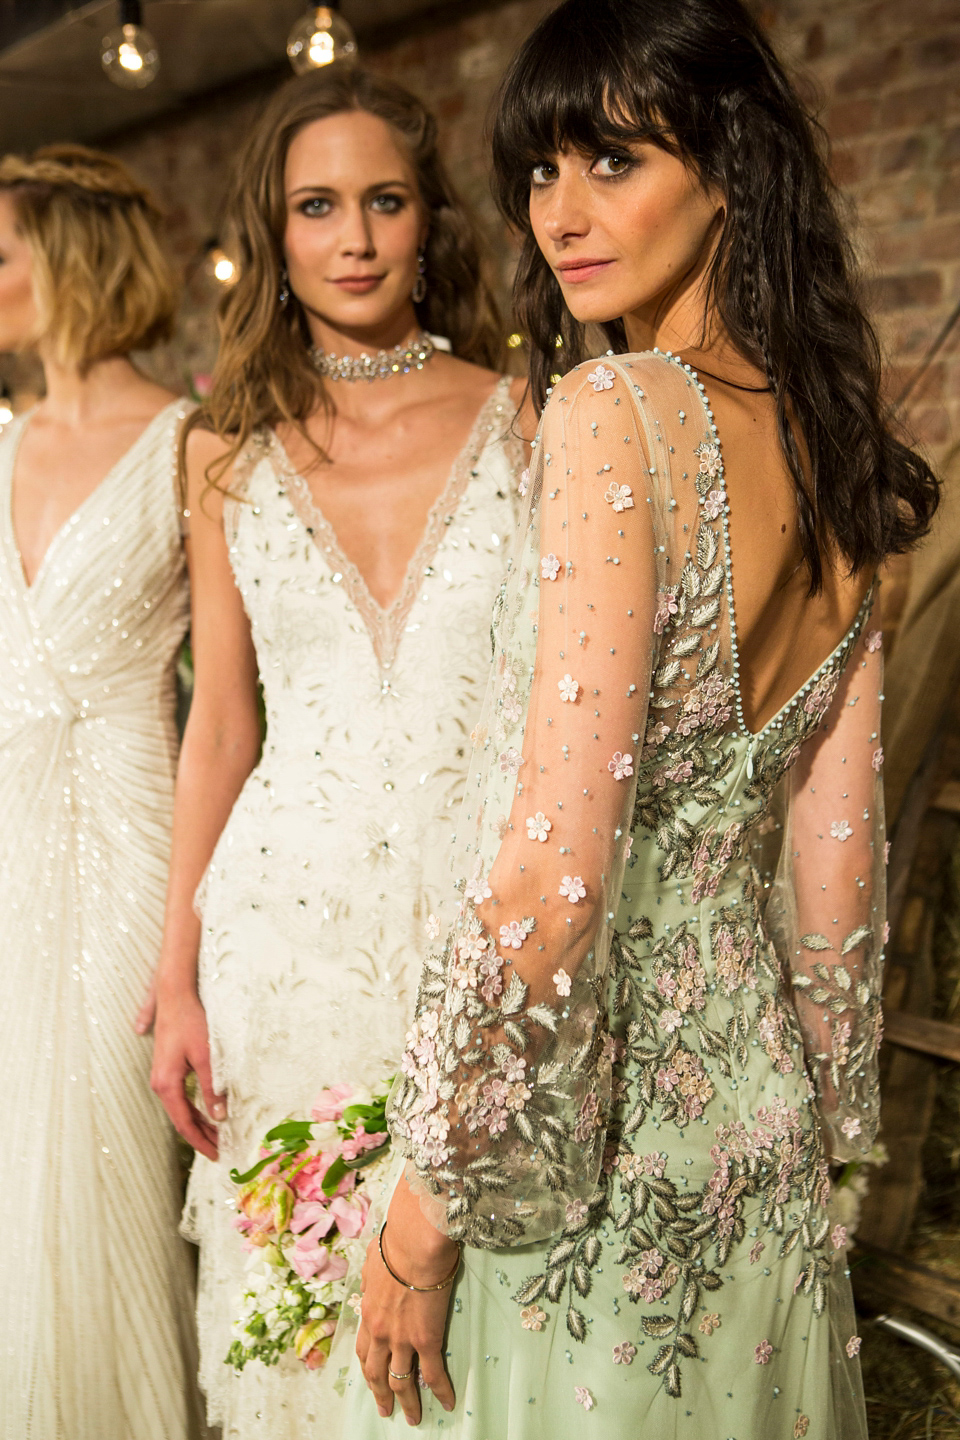 Jenny Packham 2017 collection, launched in New York on Friday 15th April 2016.